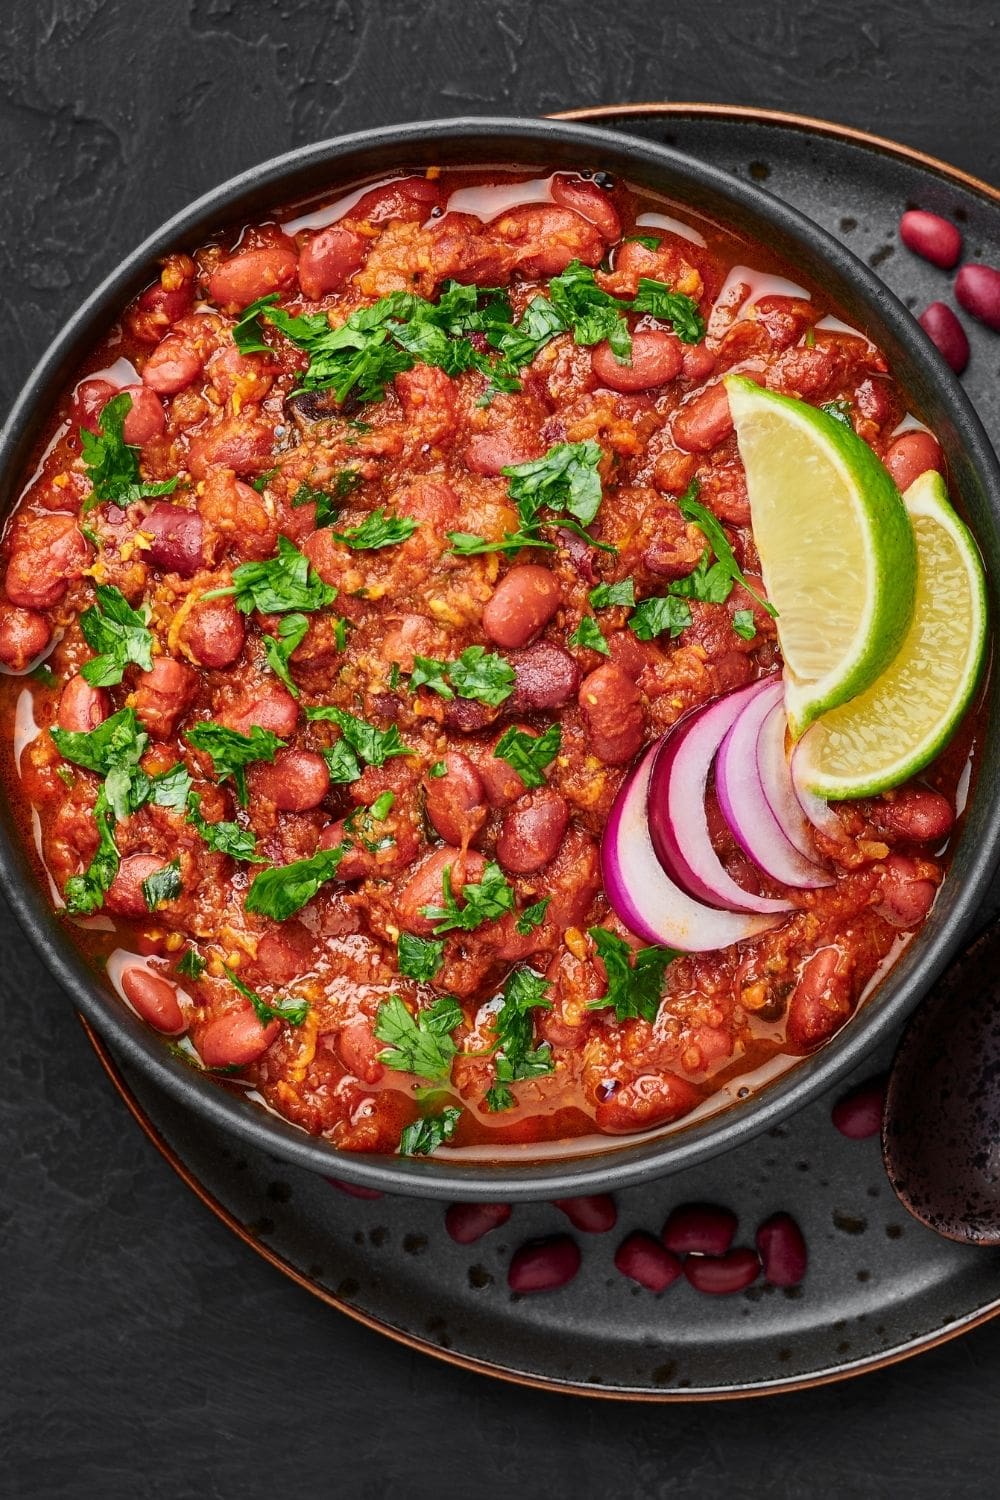 30 Simple Kidney Bean Recipes: Kidney Bean Curry with Lime and Onions